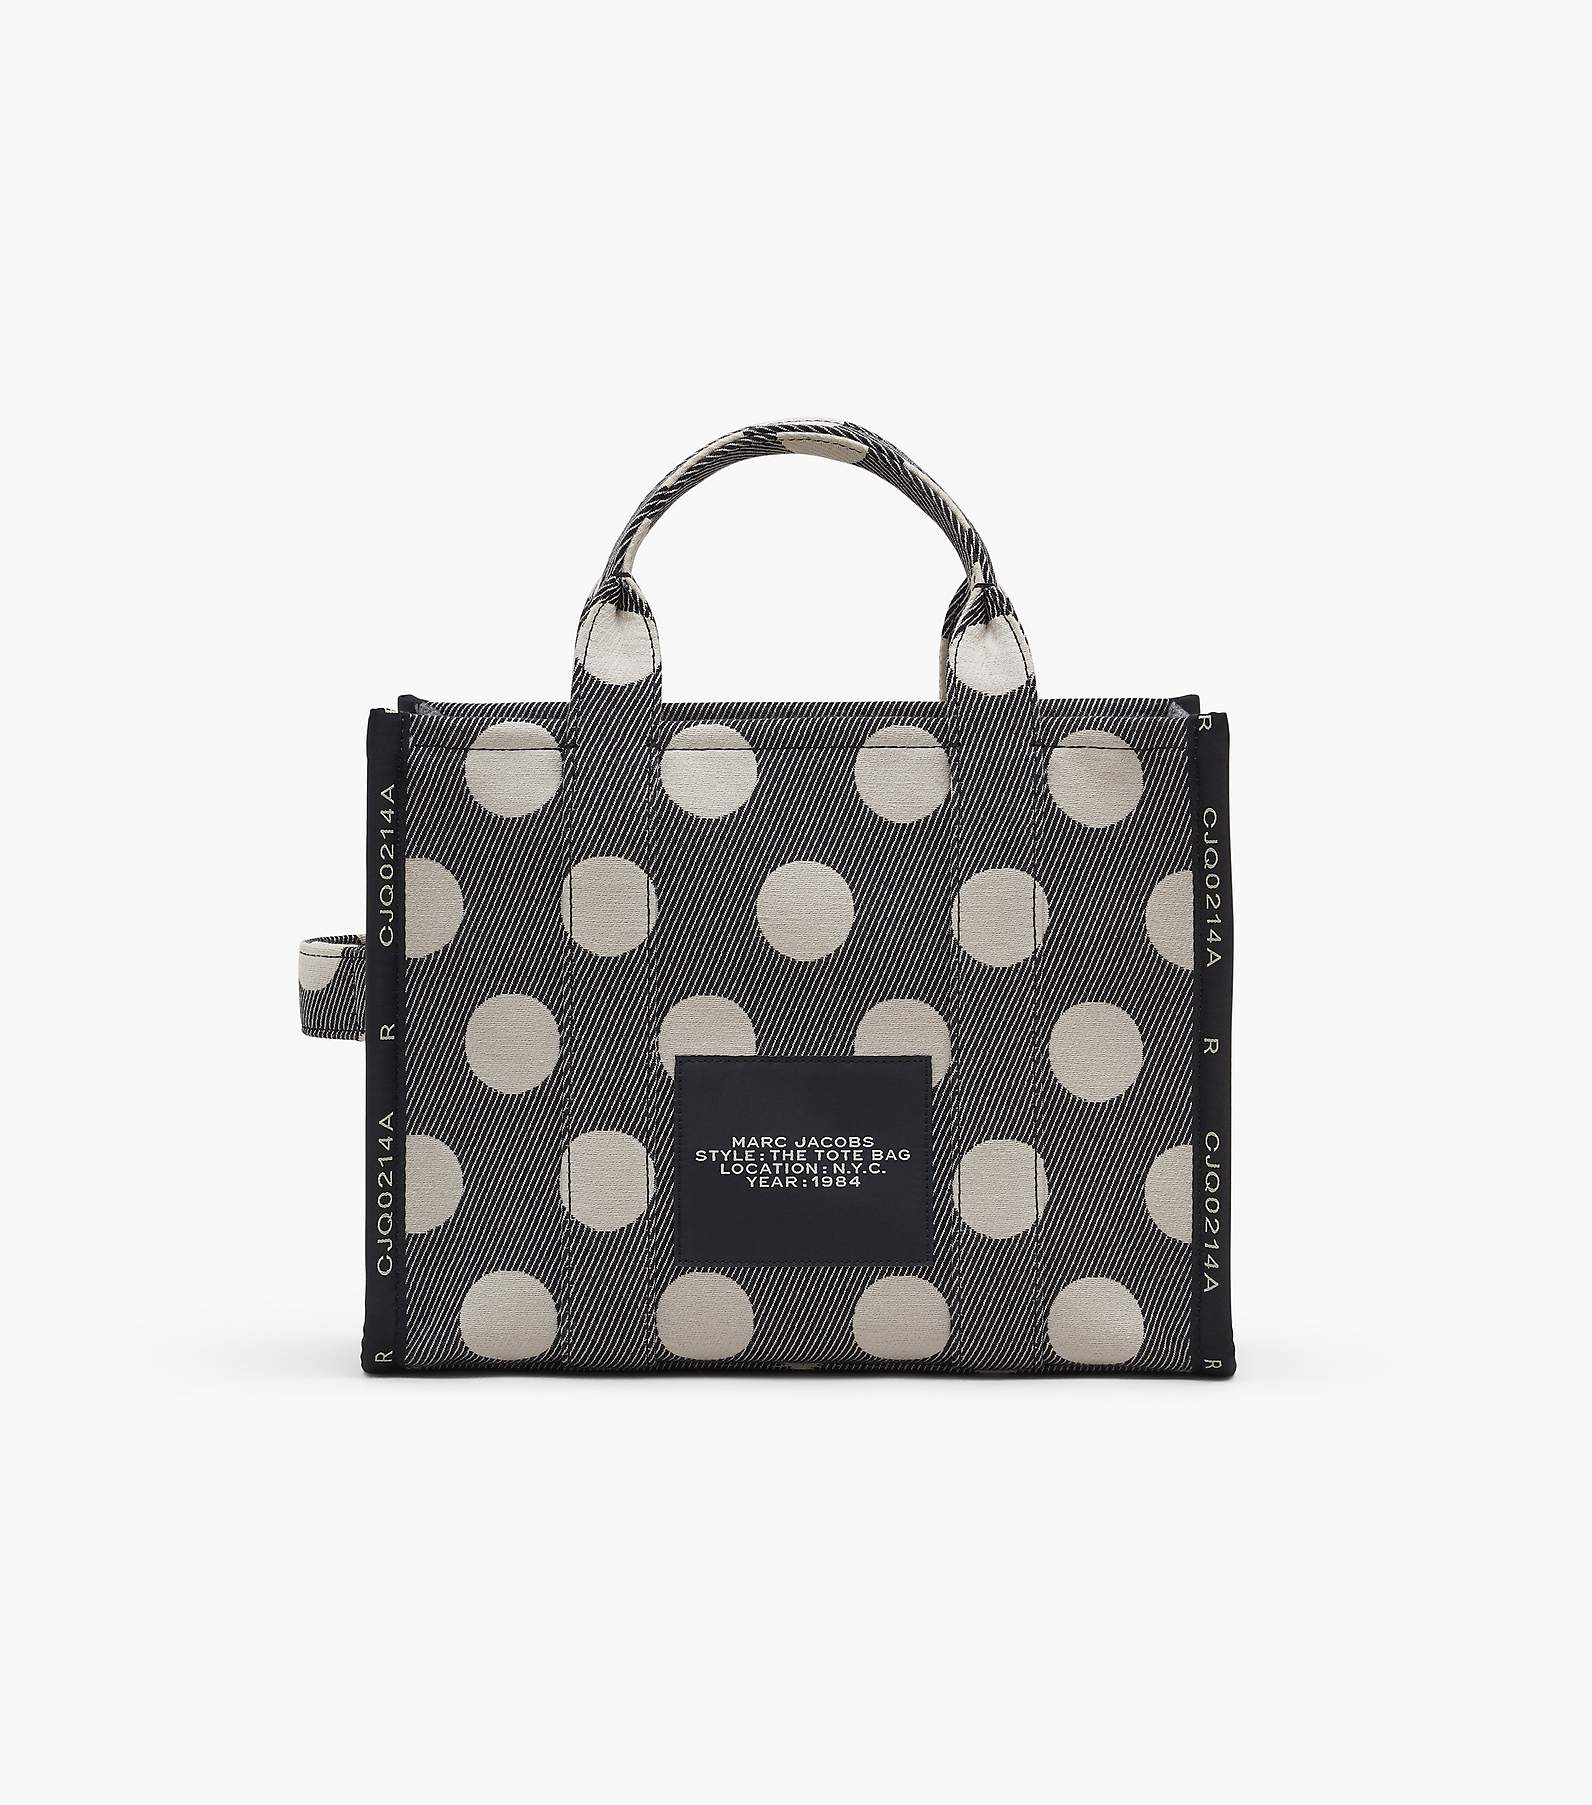 The Medium Jacquard Canvas Tote Bag in Beige - Marc Jacobs